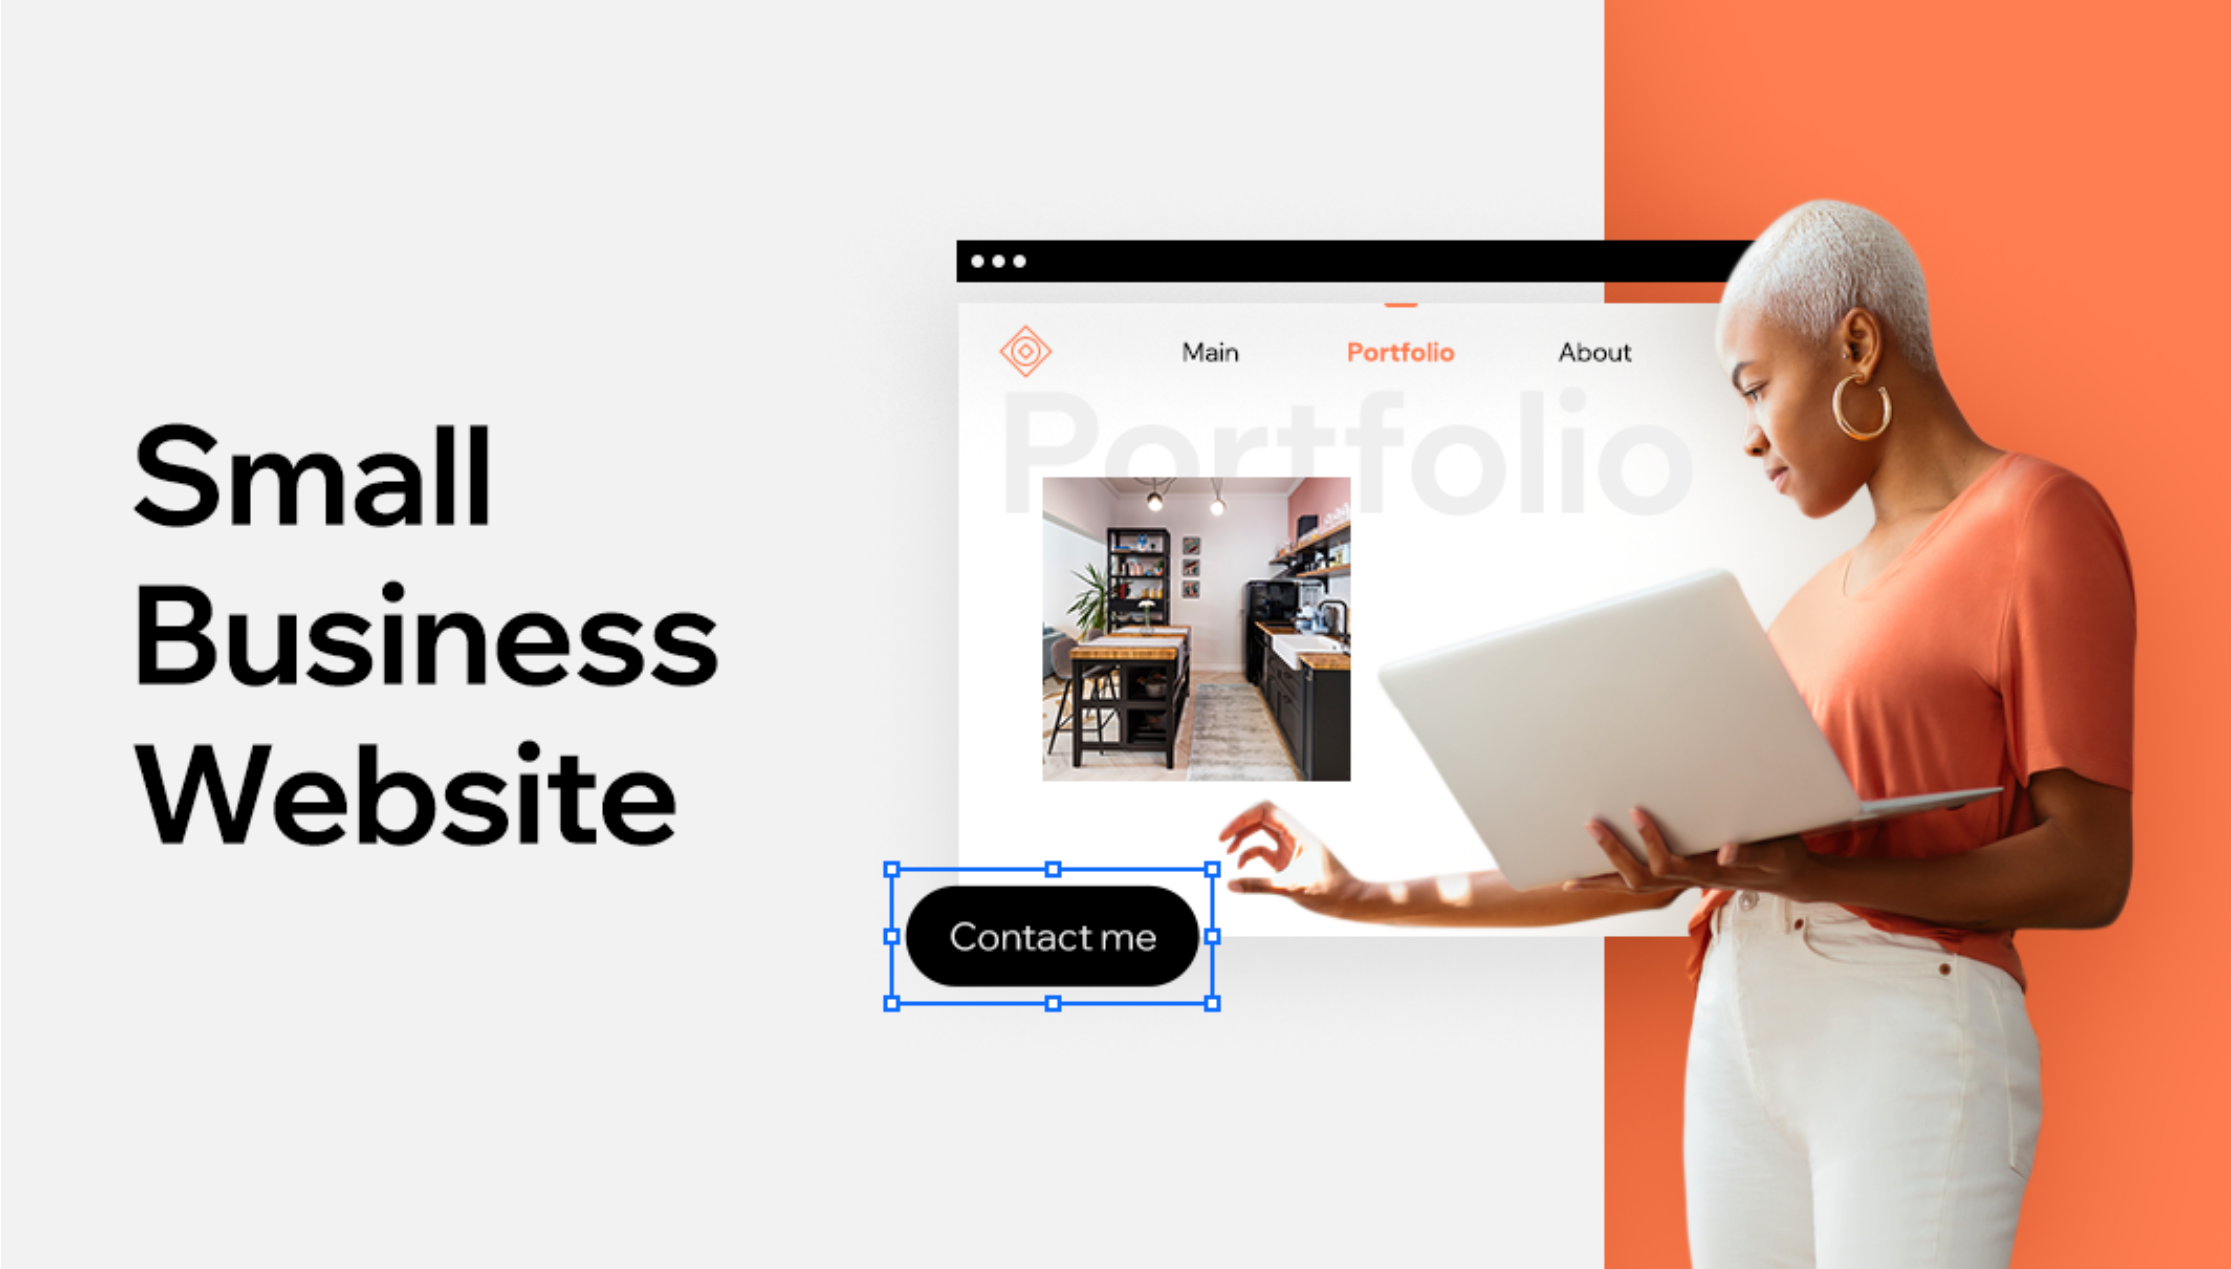 10 Key Steps to Building a Great Small Business Website